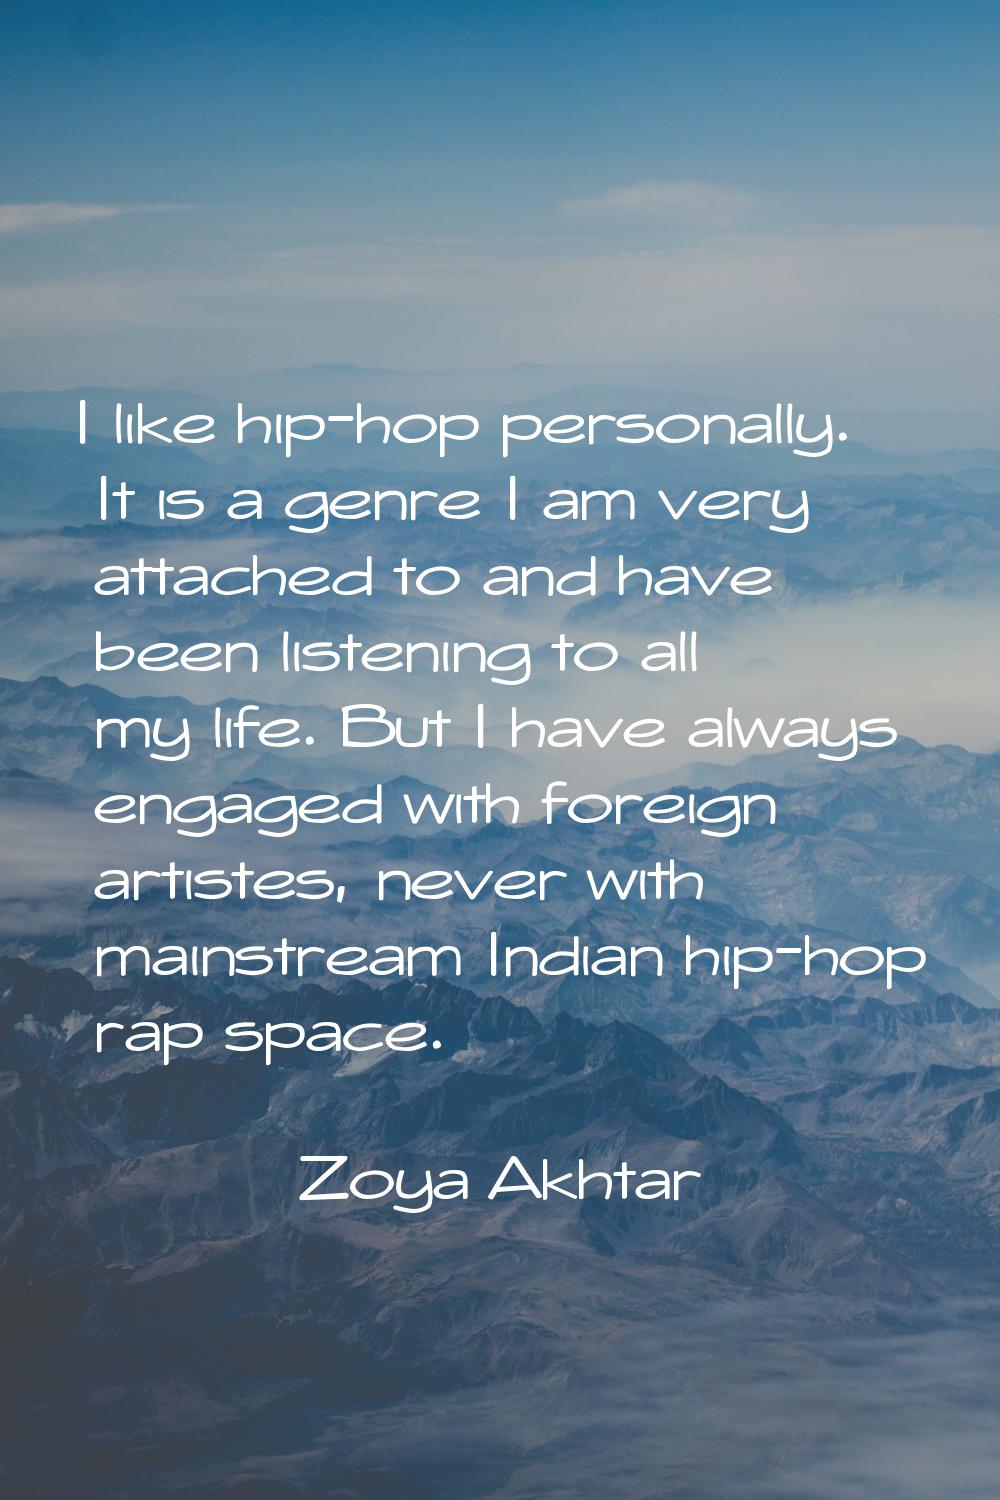 I like hip-hop personally. It is a genre I am very attached to and have been listening to all my li